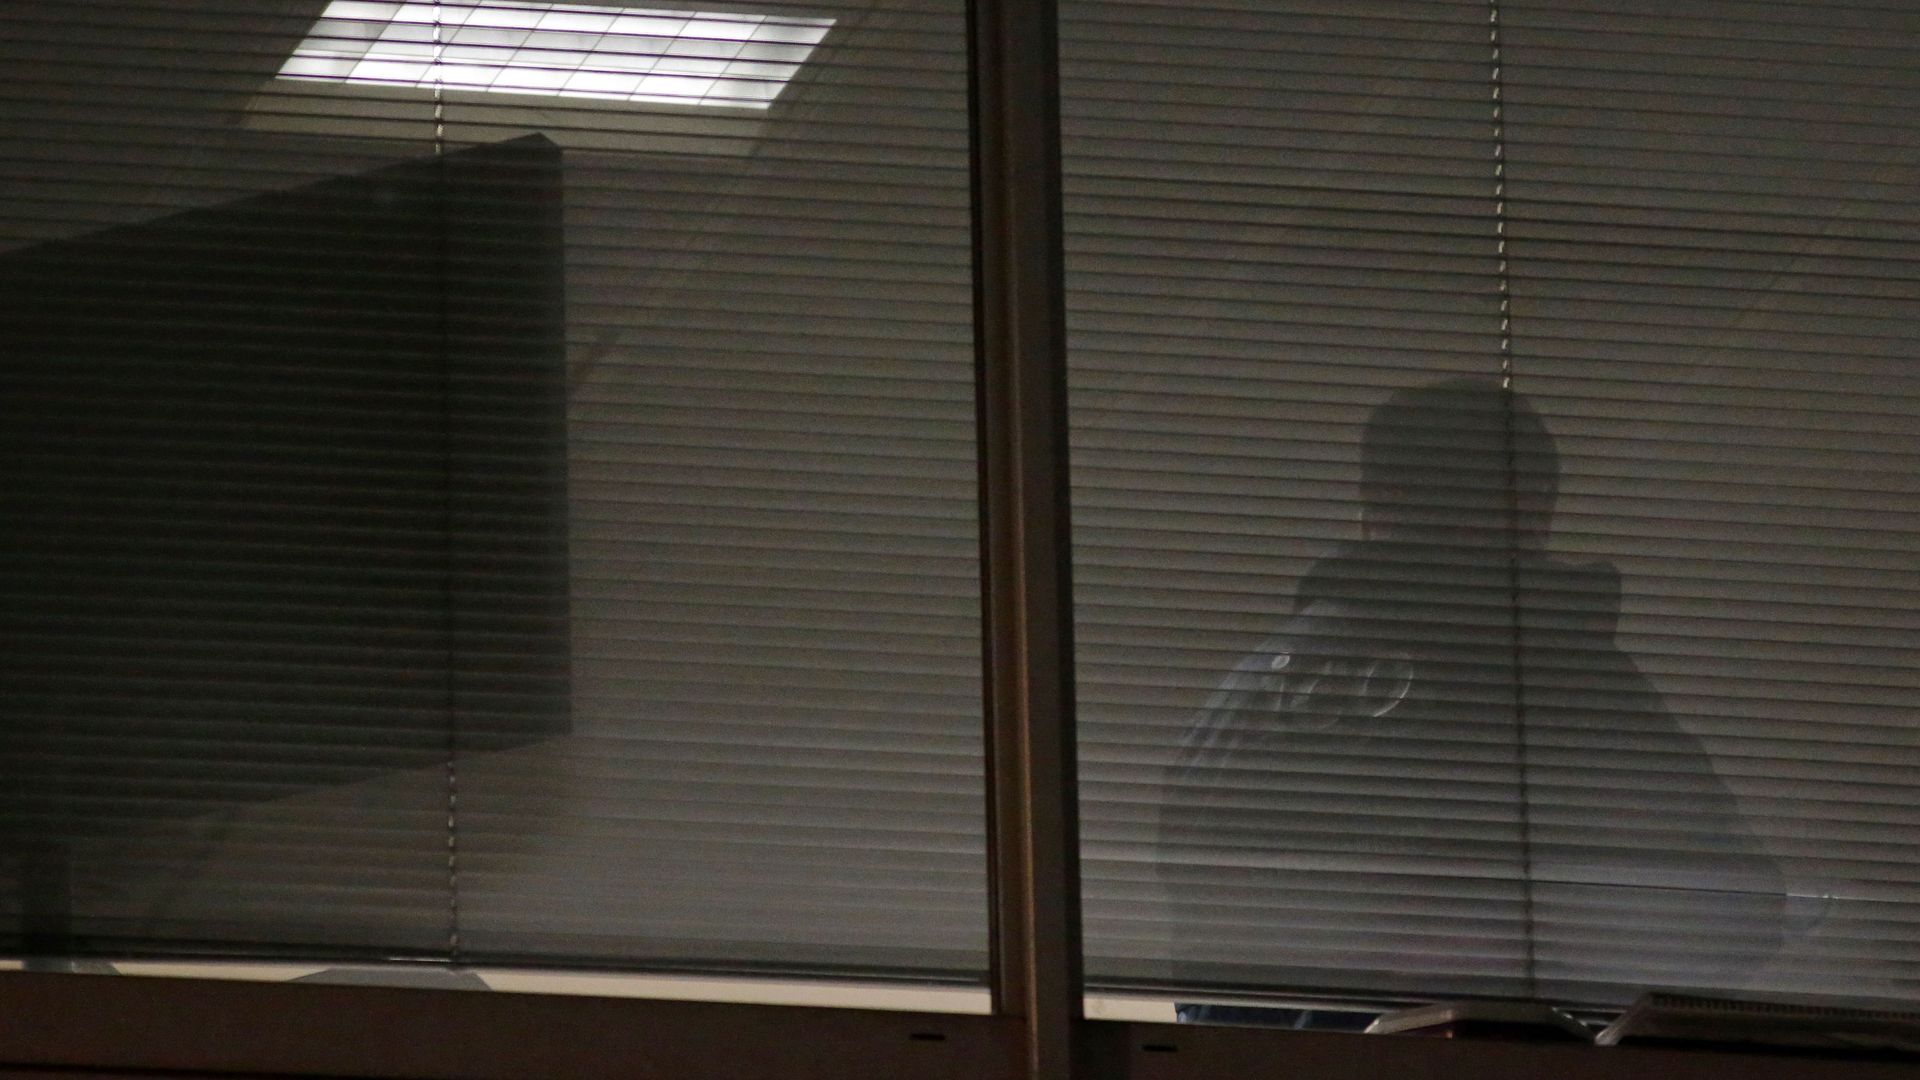 A man is seen through blinds inside the offices of Cambridge Analytica in central London.